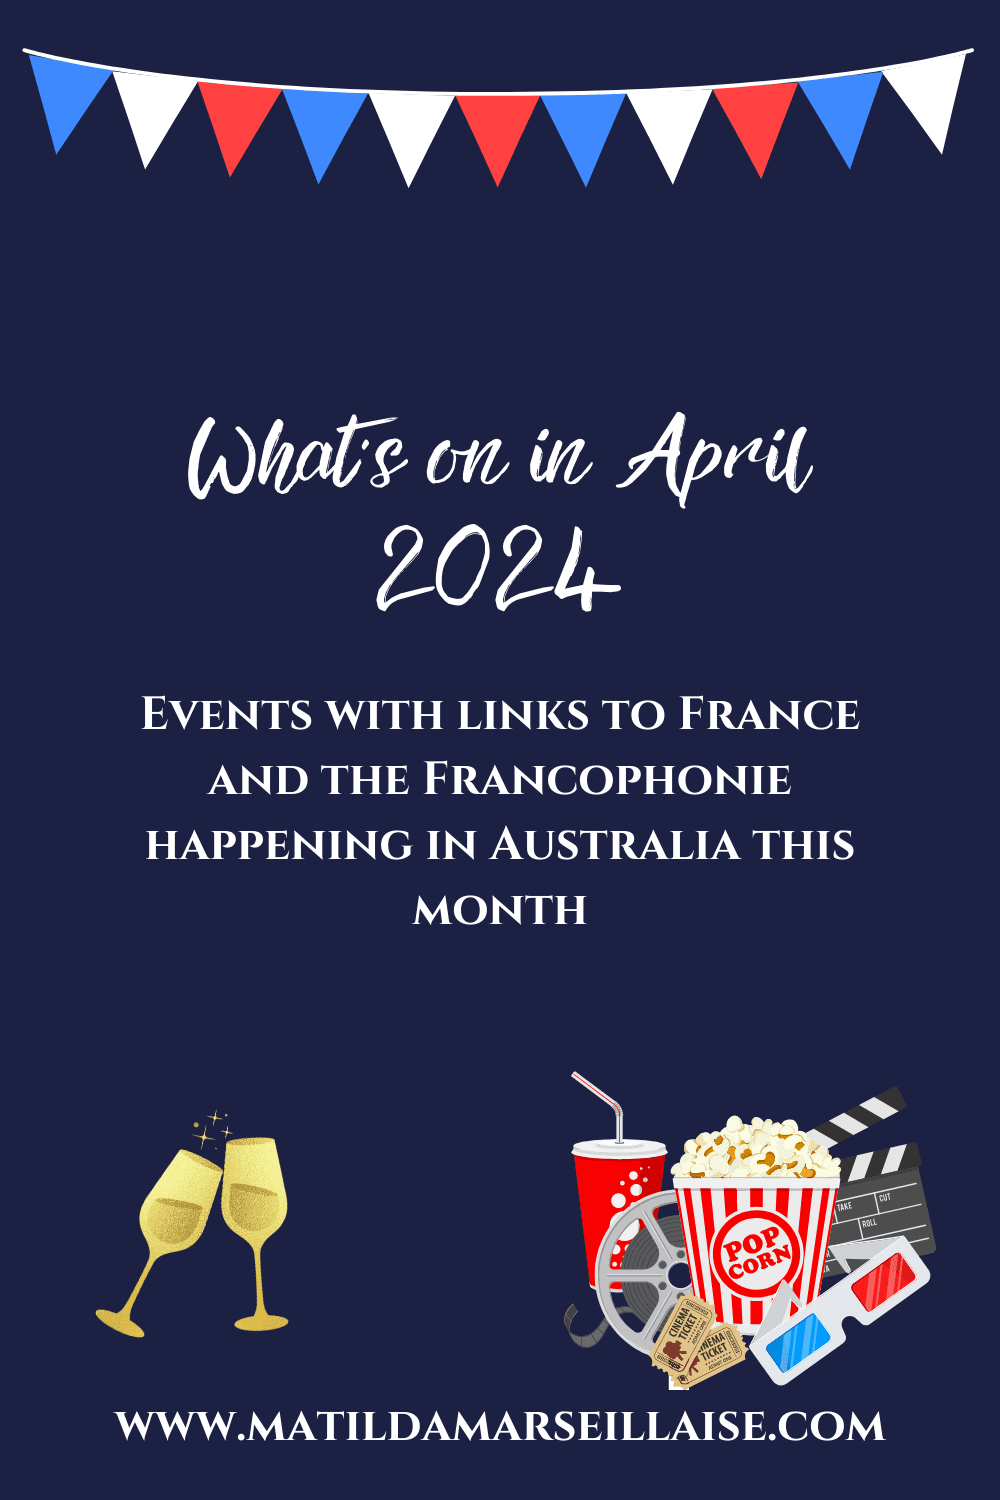 What’s on in April 2024? Events with links to France and the Francophonie happening in Australia this month